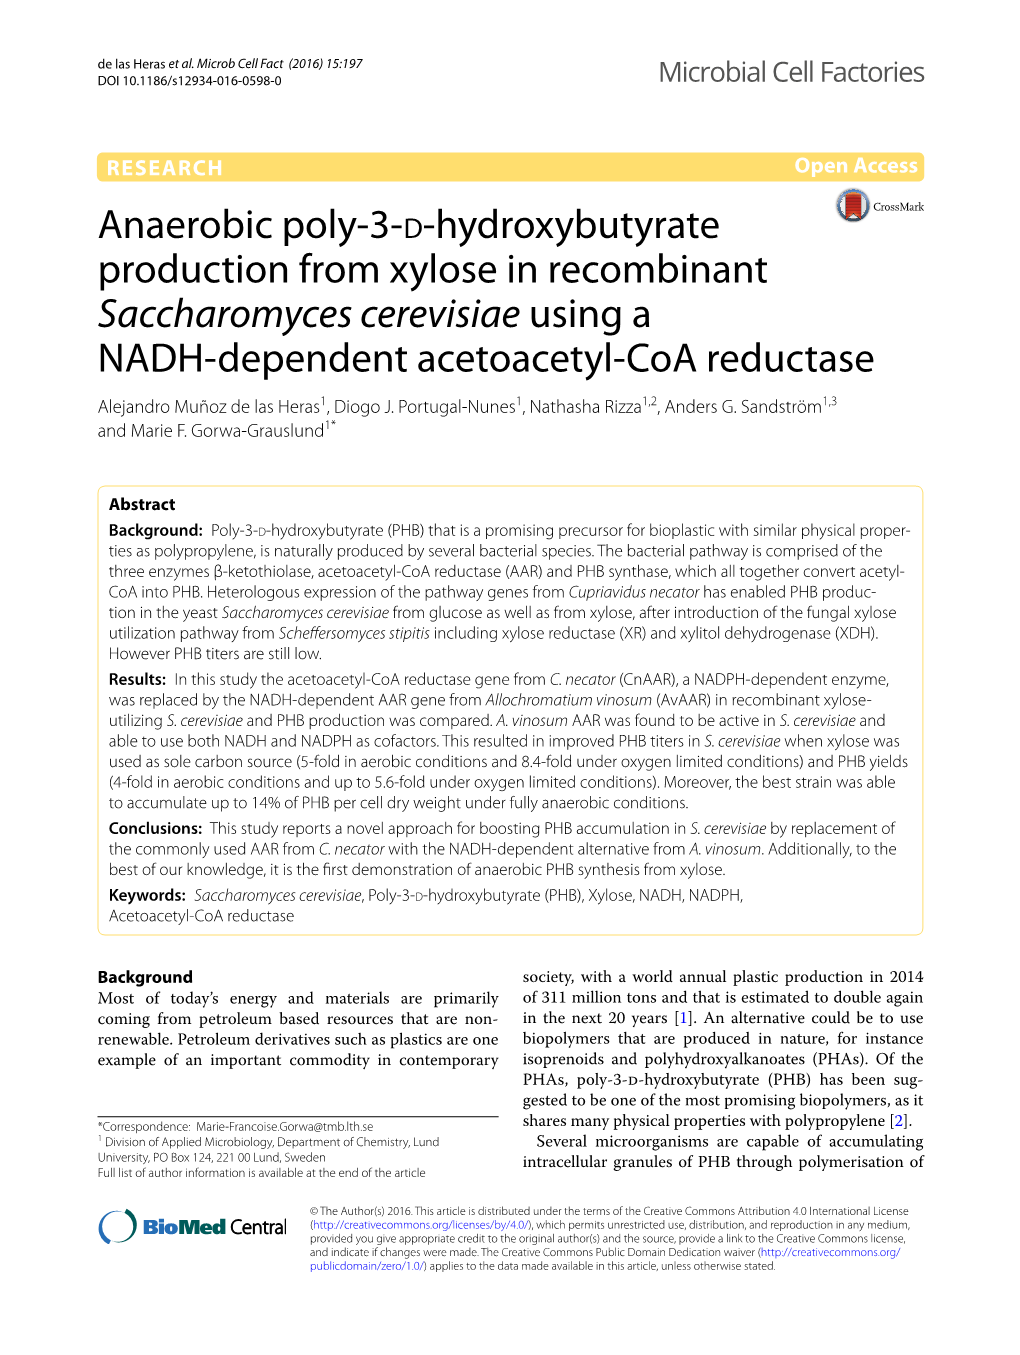 Anaerobic Poly-3-D-Hydroxybutyrate Production from Xylose in Recombinant Saccharomyces Cerevisiae Using a NADH-Dependent Acetoac